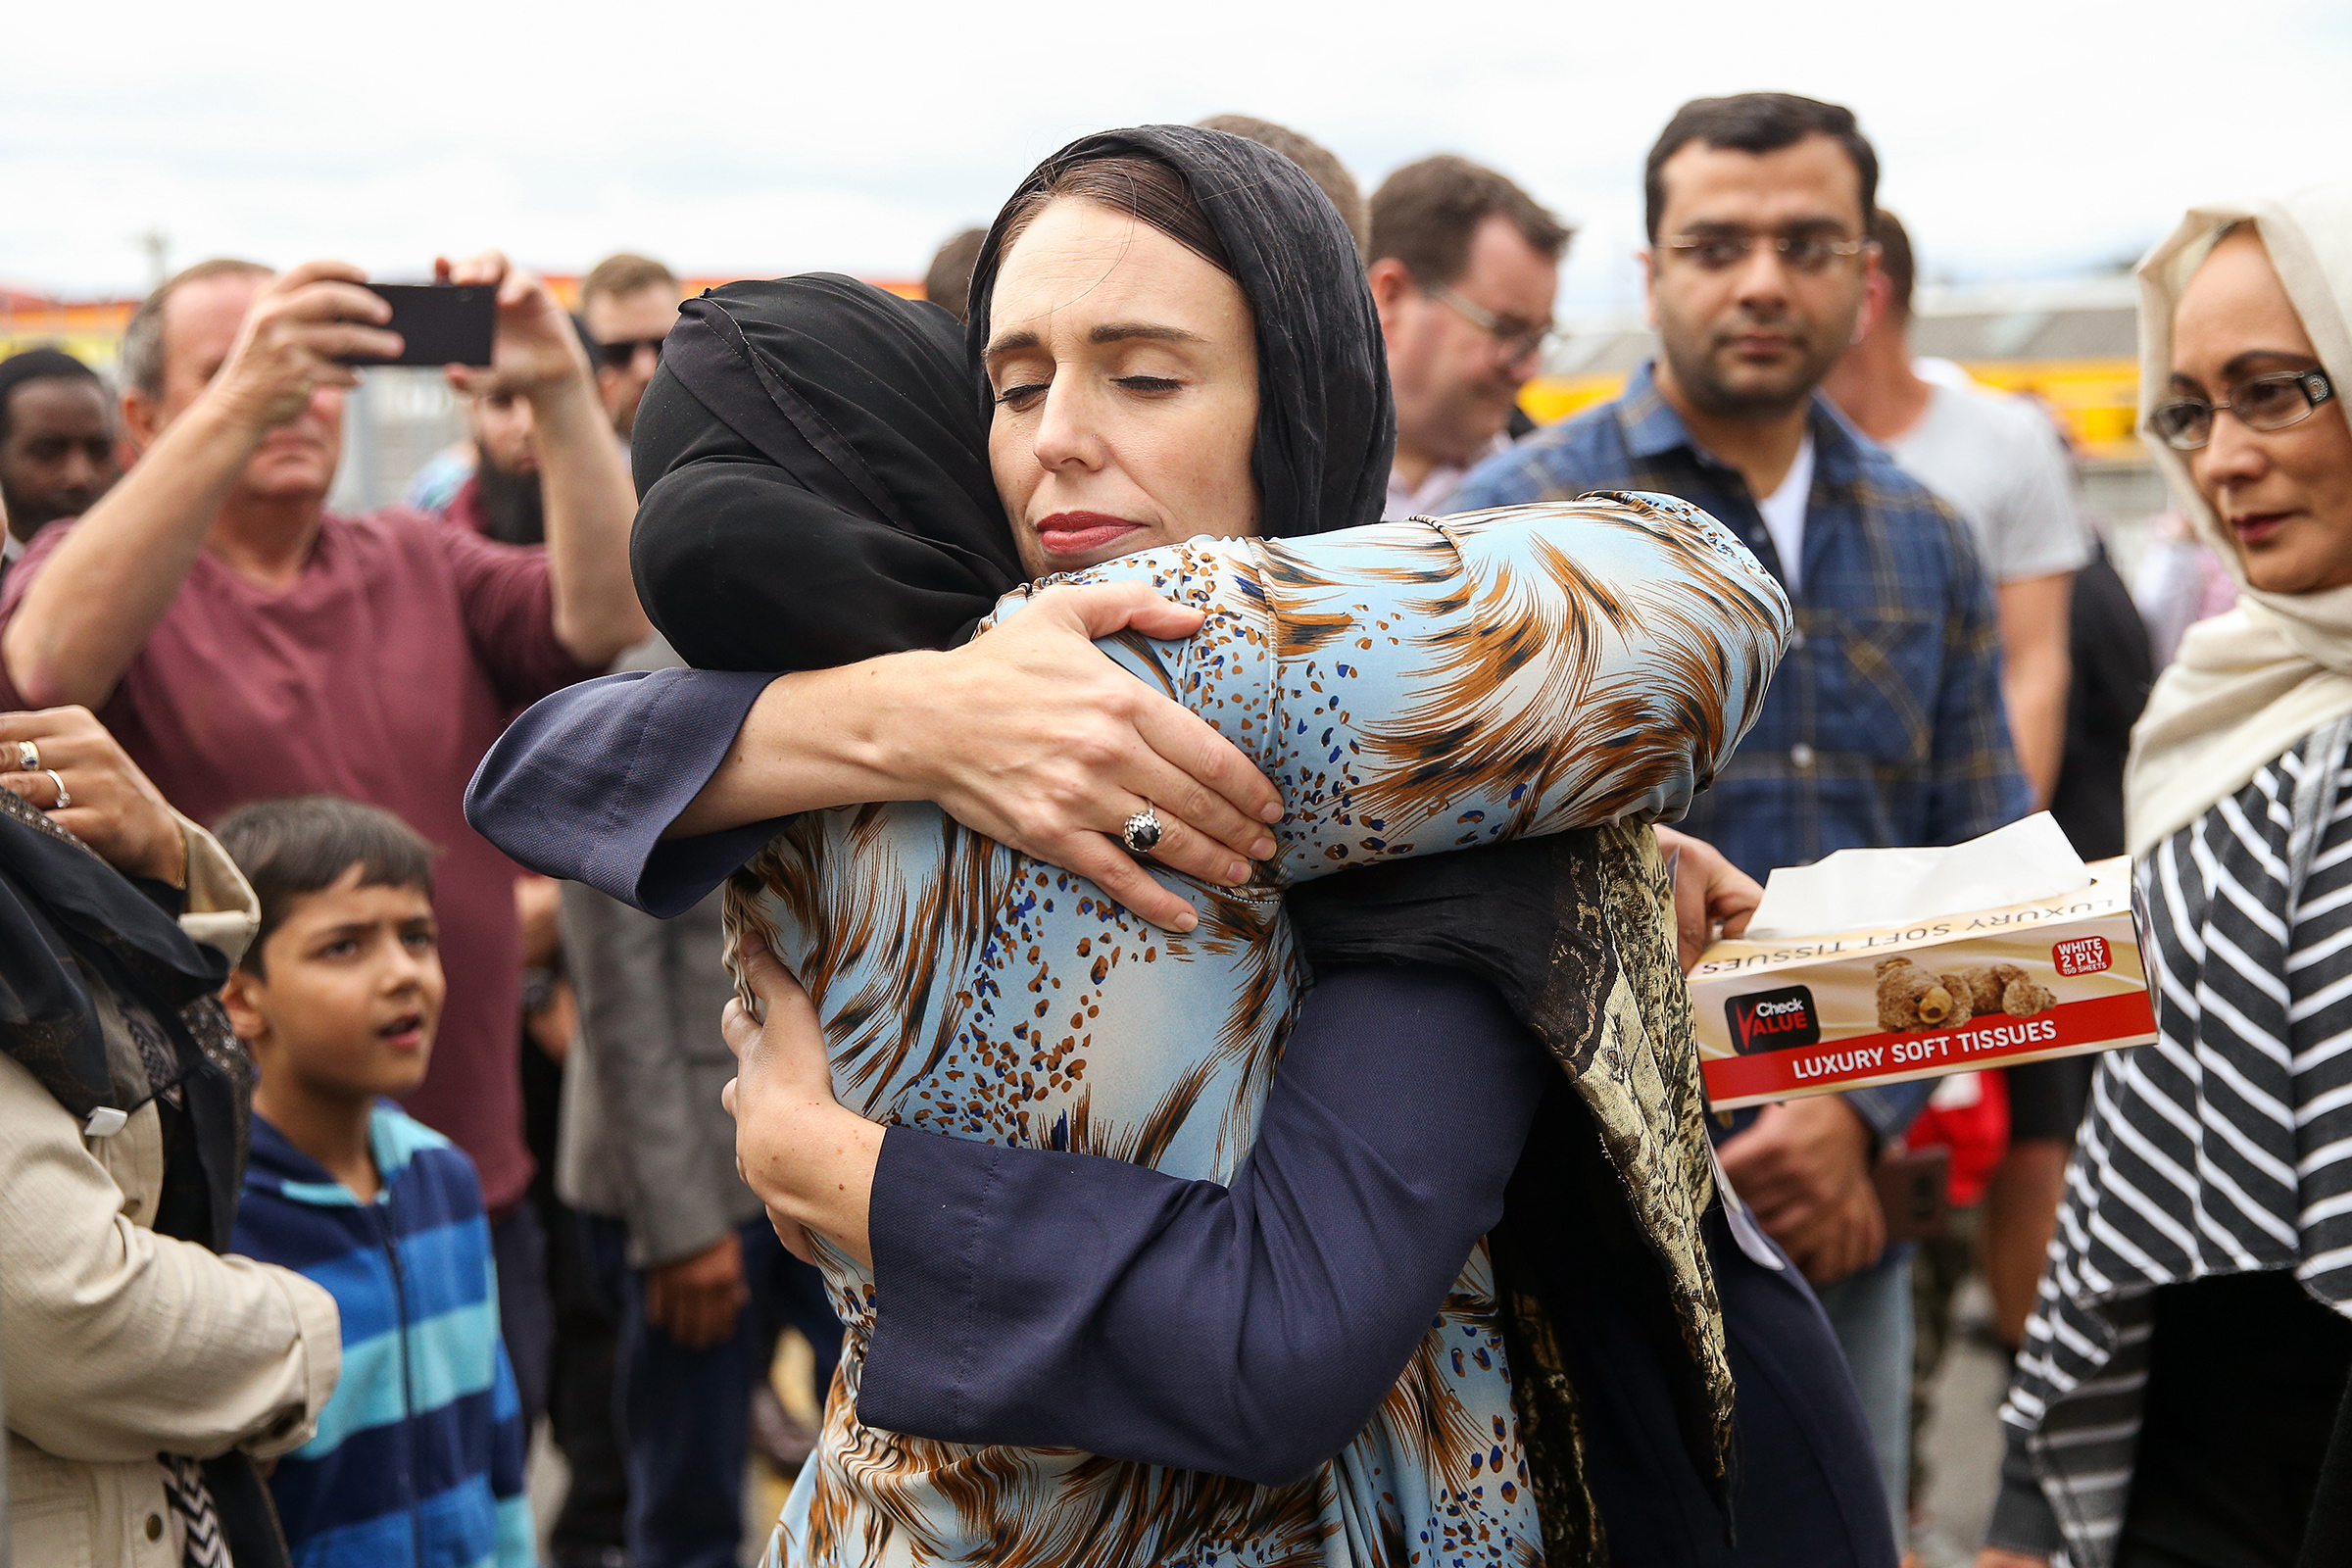 Jacinda Ardern hugs a mosque-goer at the Kilbirnie Mosque, in Wellington, New Zealand, on March 17, 2019. 50 people are confirmed dead and 36 are injured still in hospital following shooting attacks on two mosques in Christchurch on March 15. (Hagen Hopkins—Getty Images)